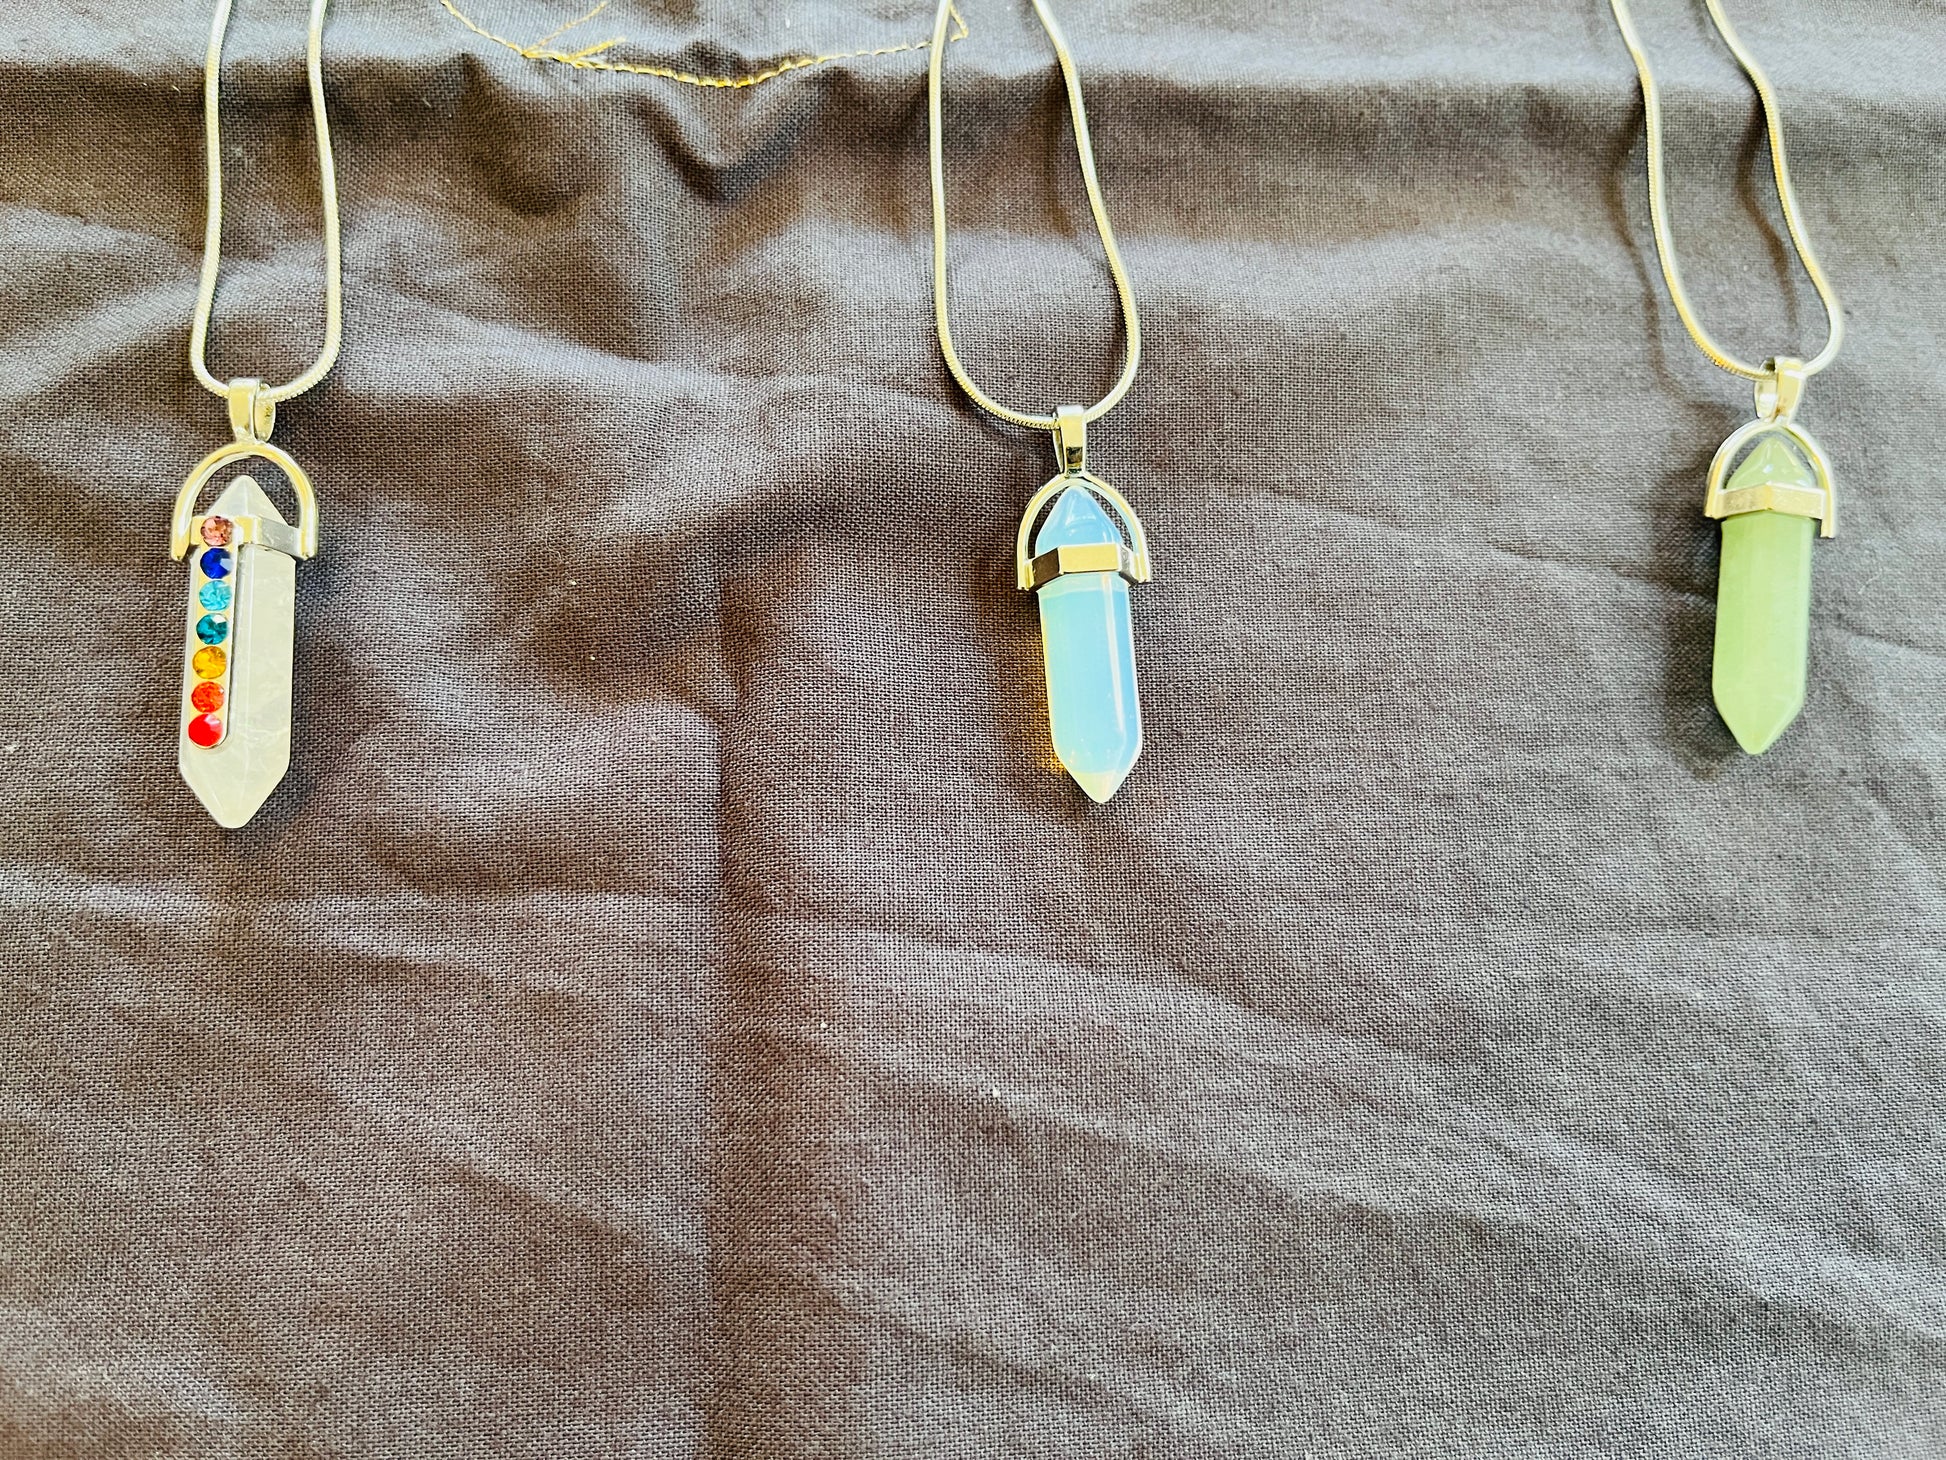 Chakra Stones on Quartz Crystal Point Pendant Necklace - Choose Your Cord:  Faux Leather or Stainless Steel.